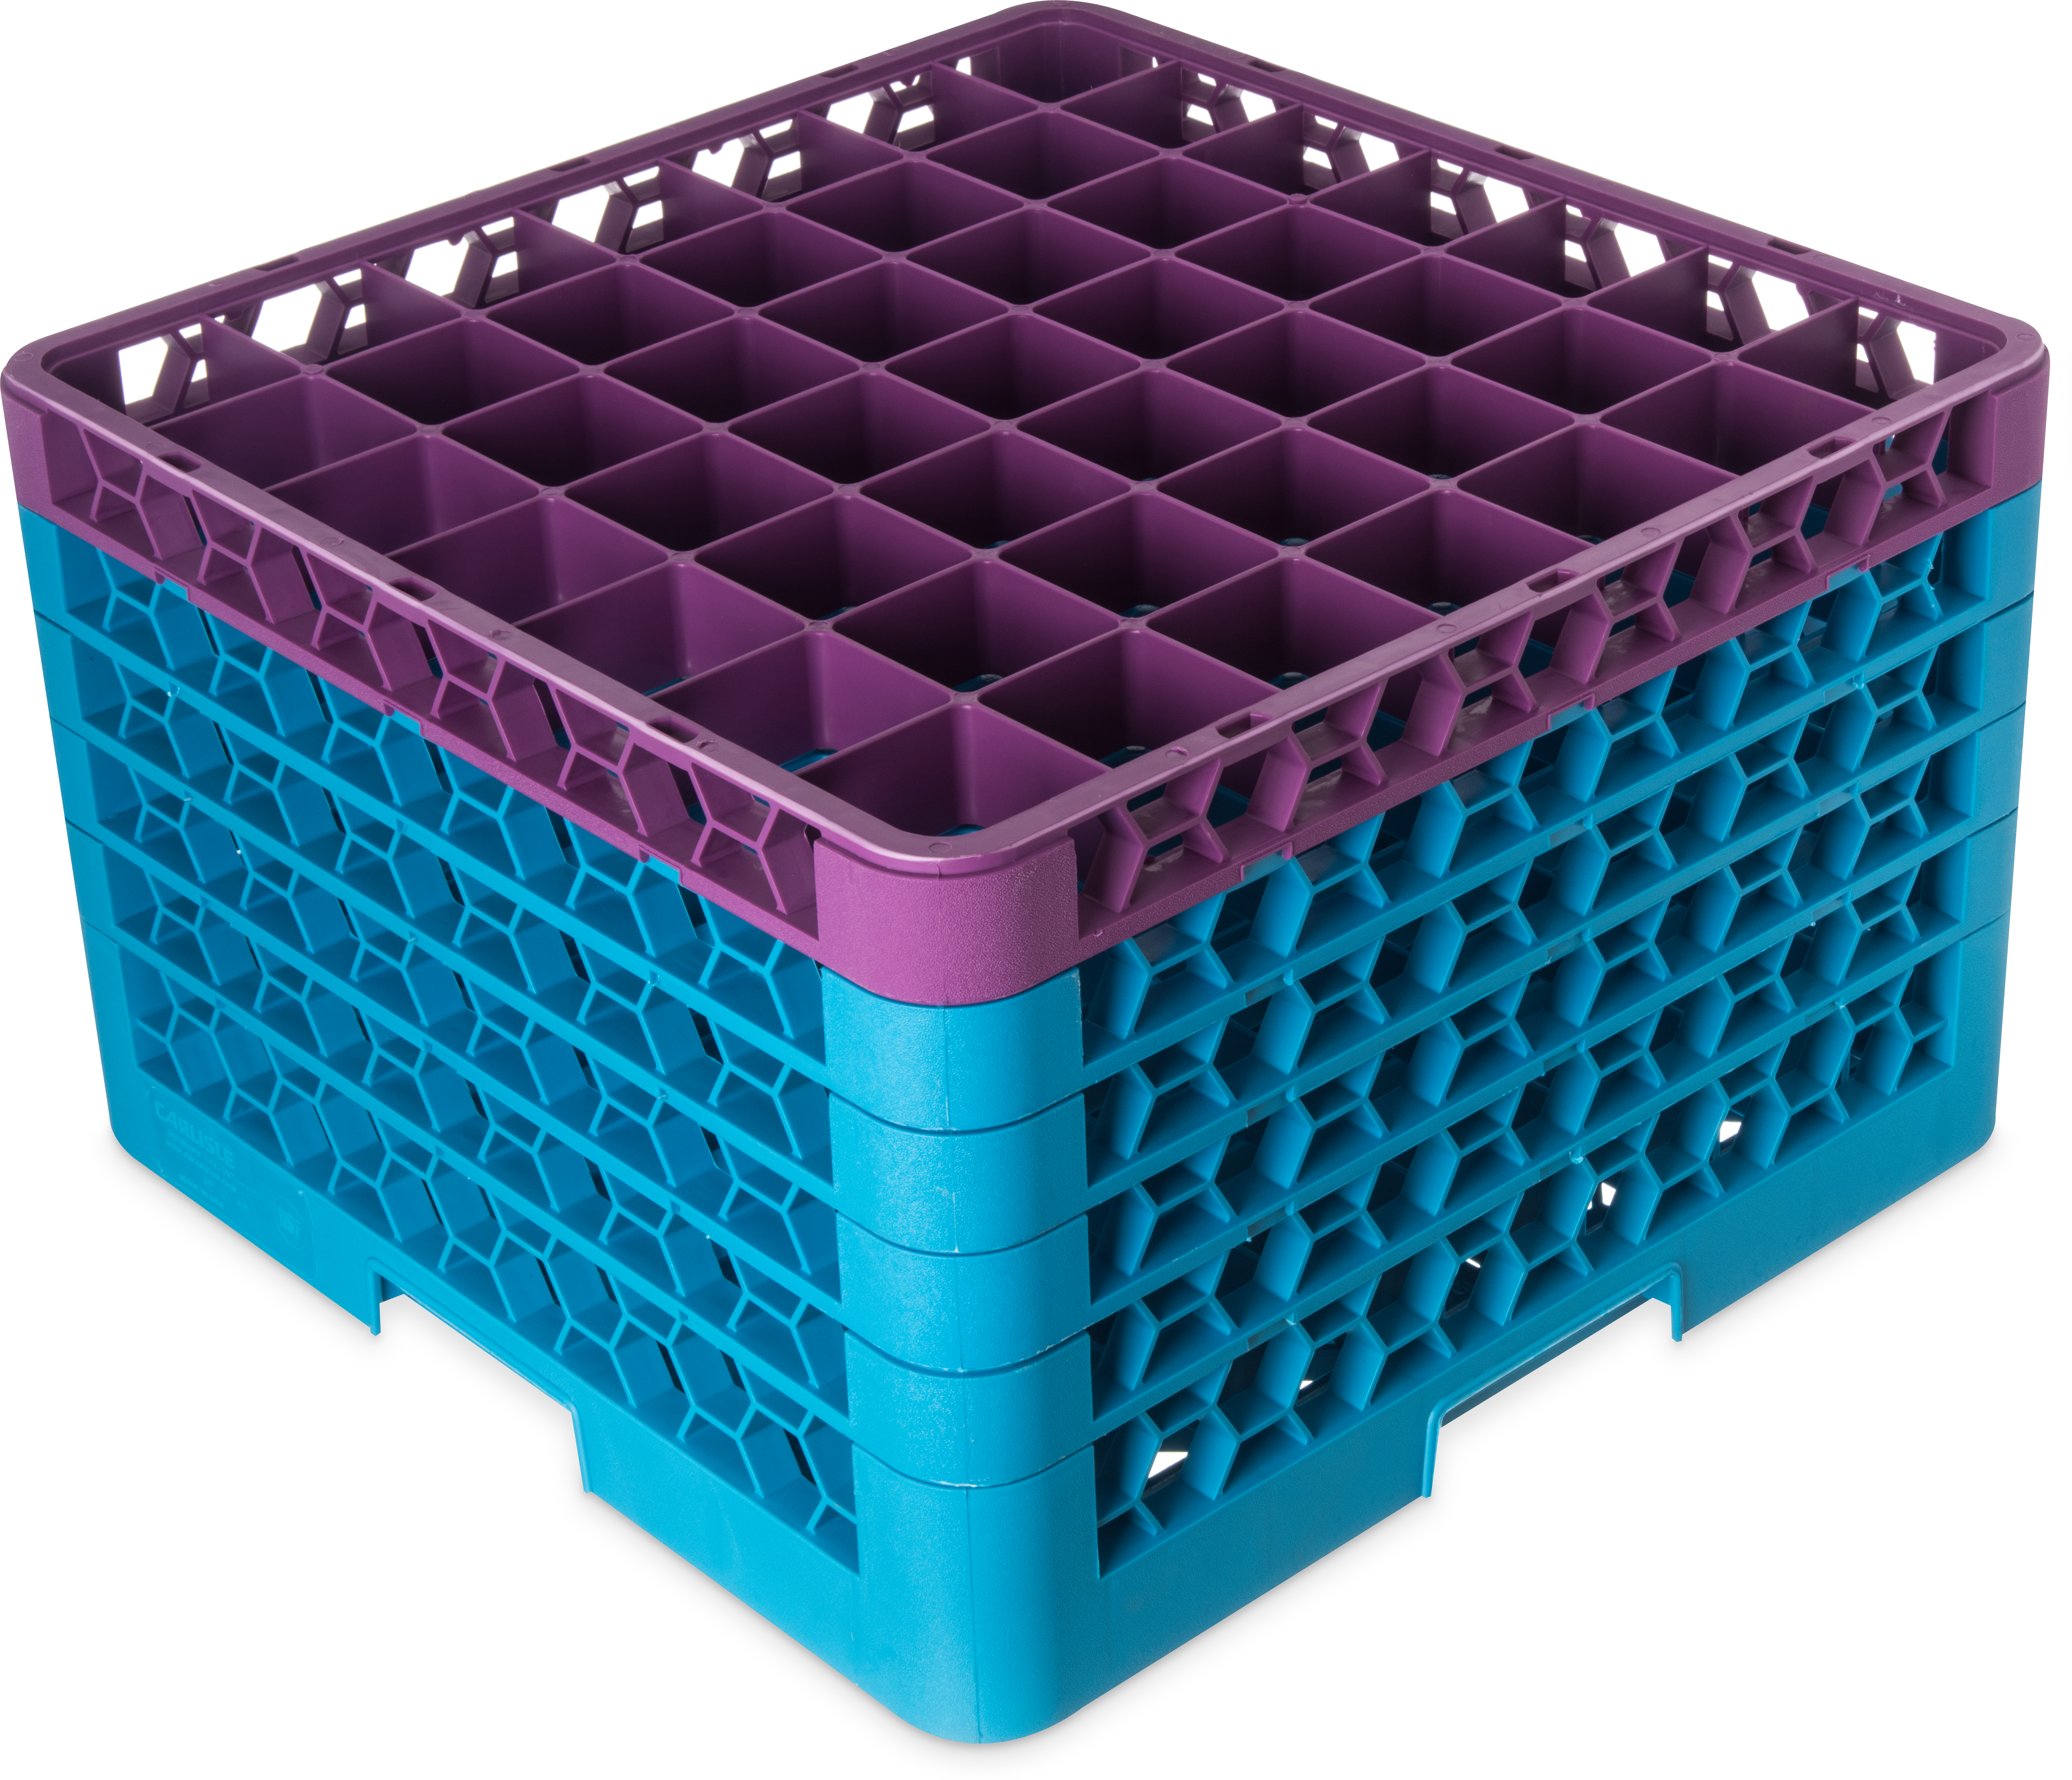 OptiClean 49 Compartment Glass Rack with 5 Extenders 11.9 - Lavender-Carlisle Blue